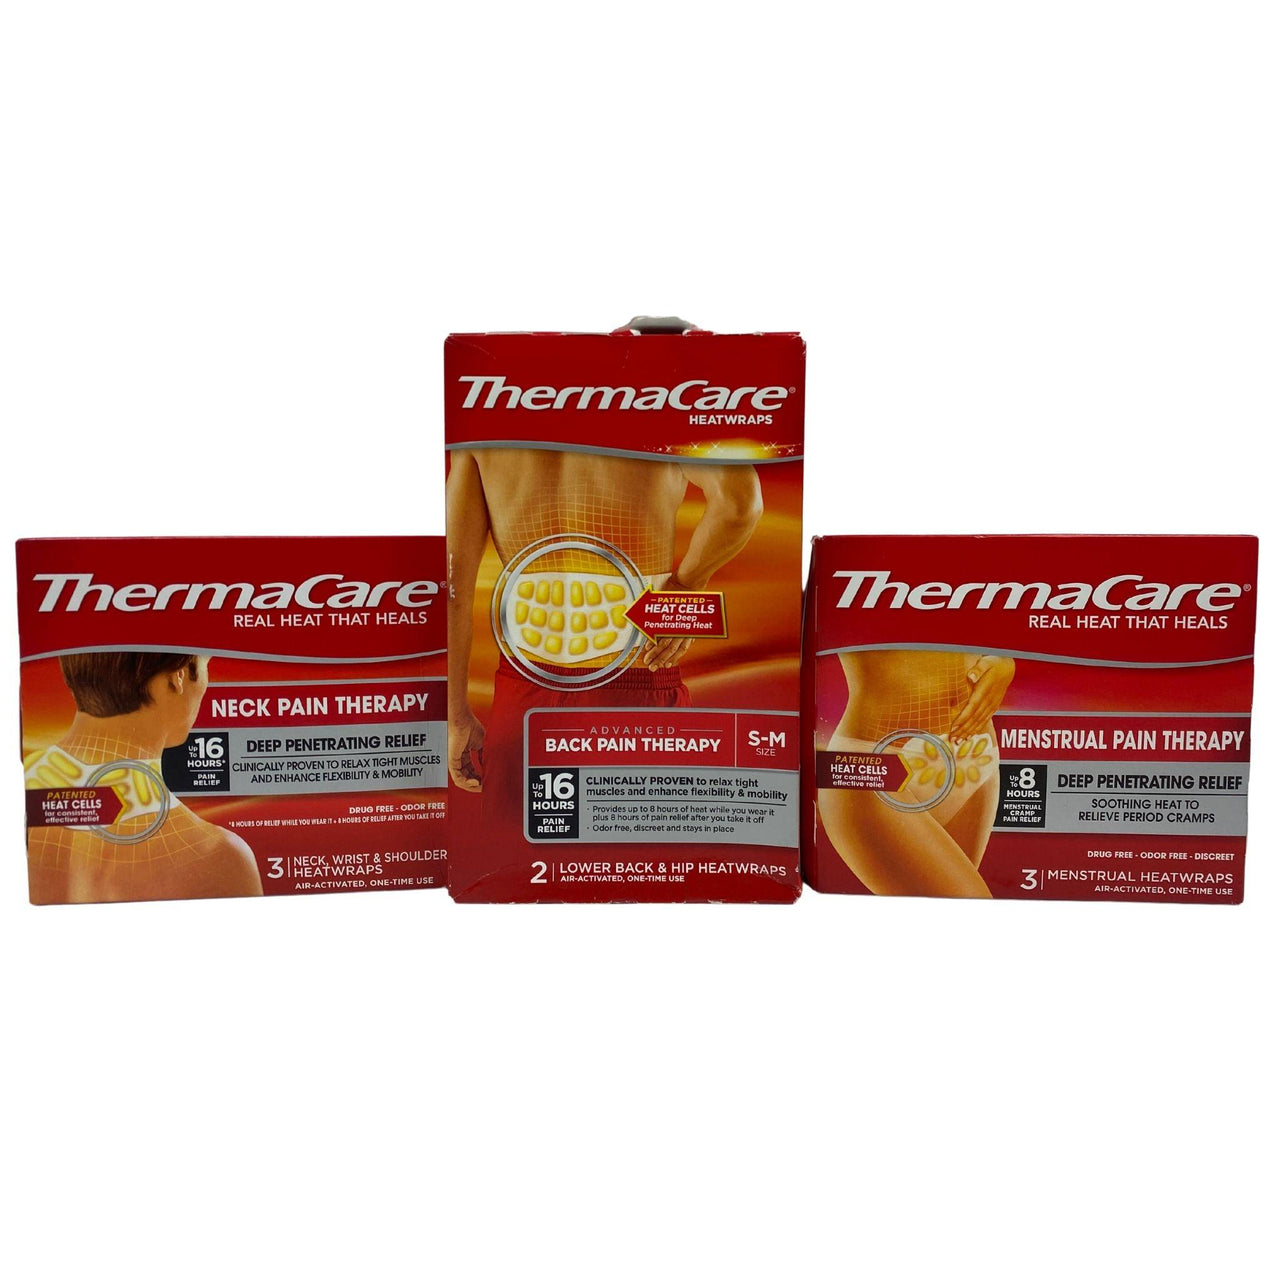 ThermaCare Real Heat That Heals (26 Pcs Lot) - Discount Wholesalers Inc